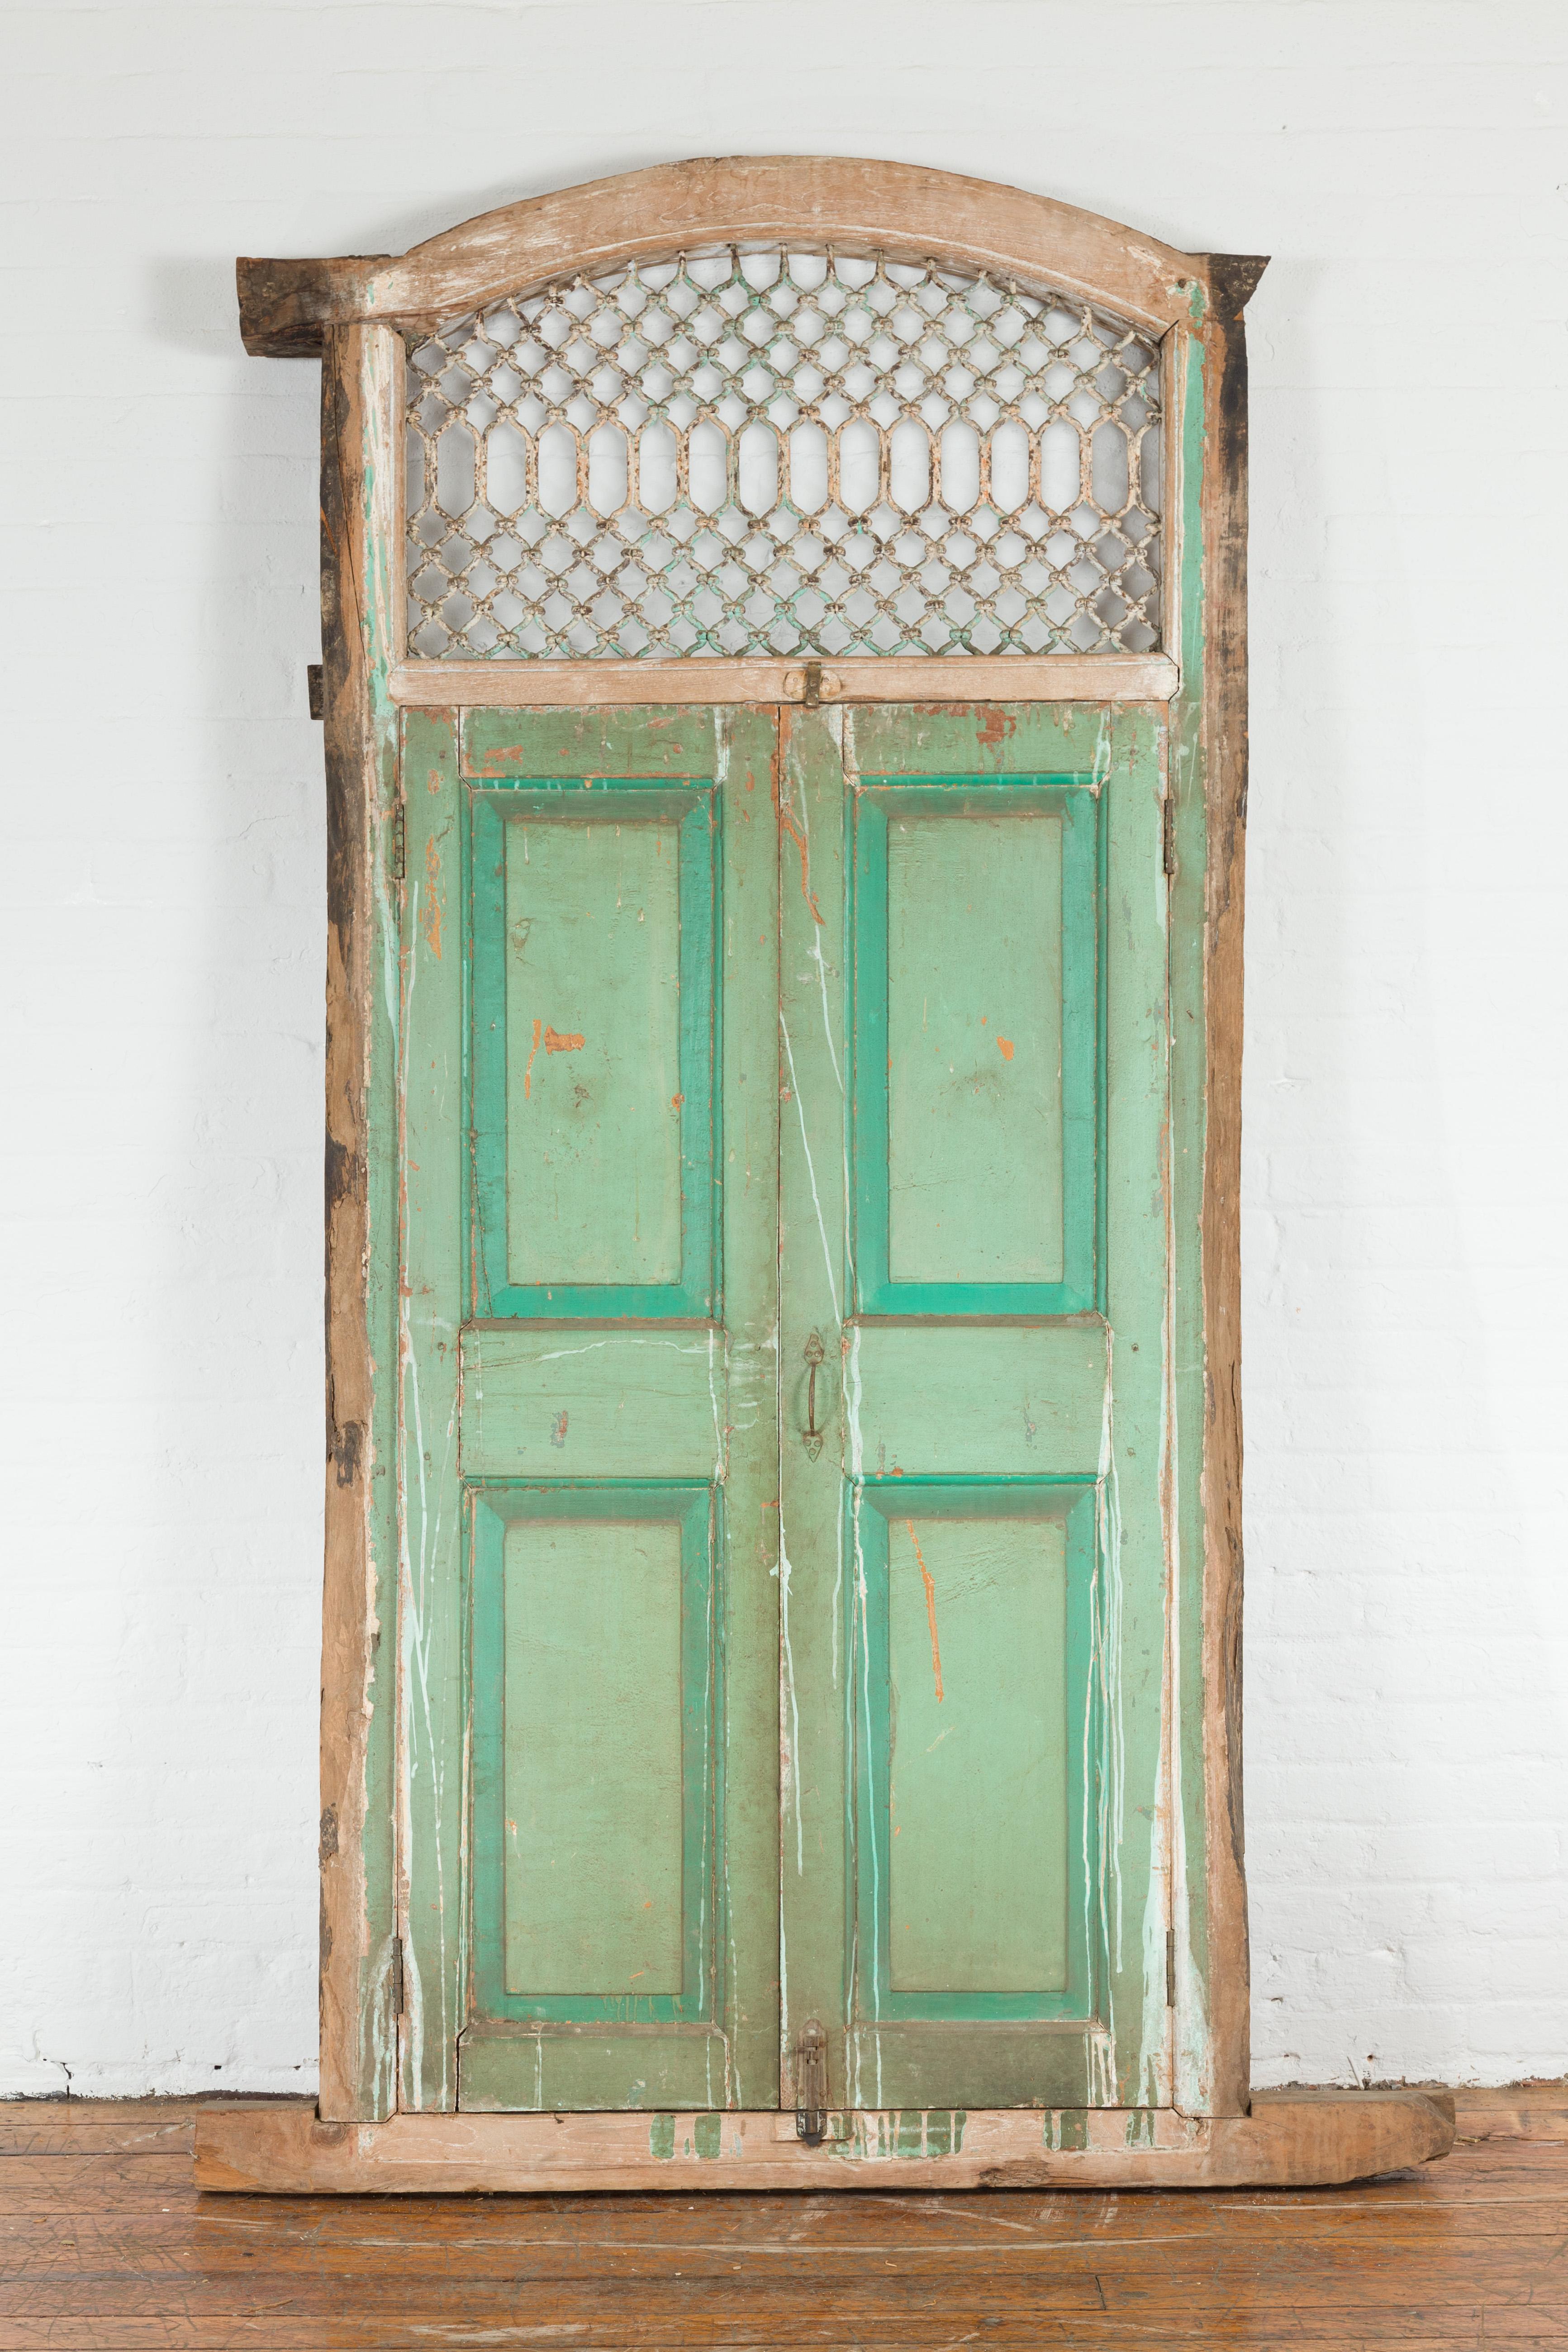 An Indian antique solid wood and iron grate window from the early 20th century, with green paint and distressed patina. Created in India during the early years of the 20th century, this antique tall window features a nicely distressed wooden